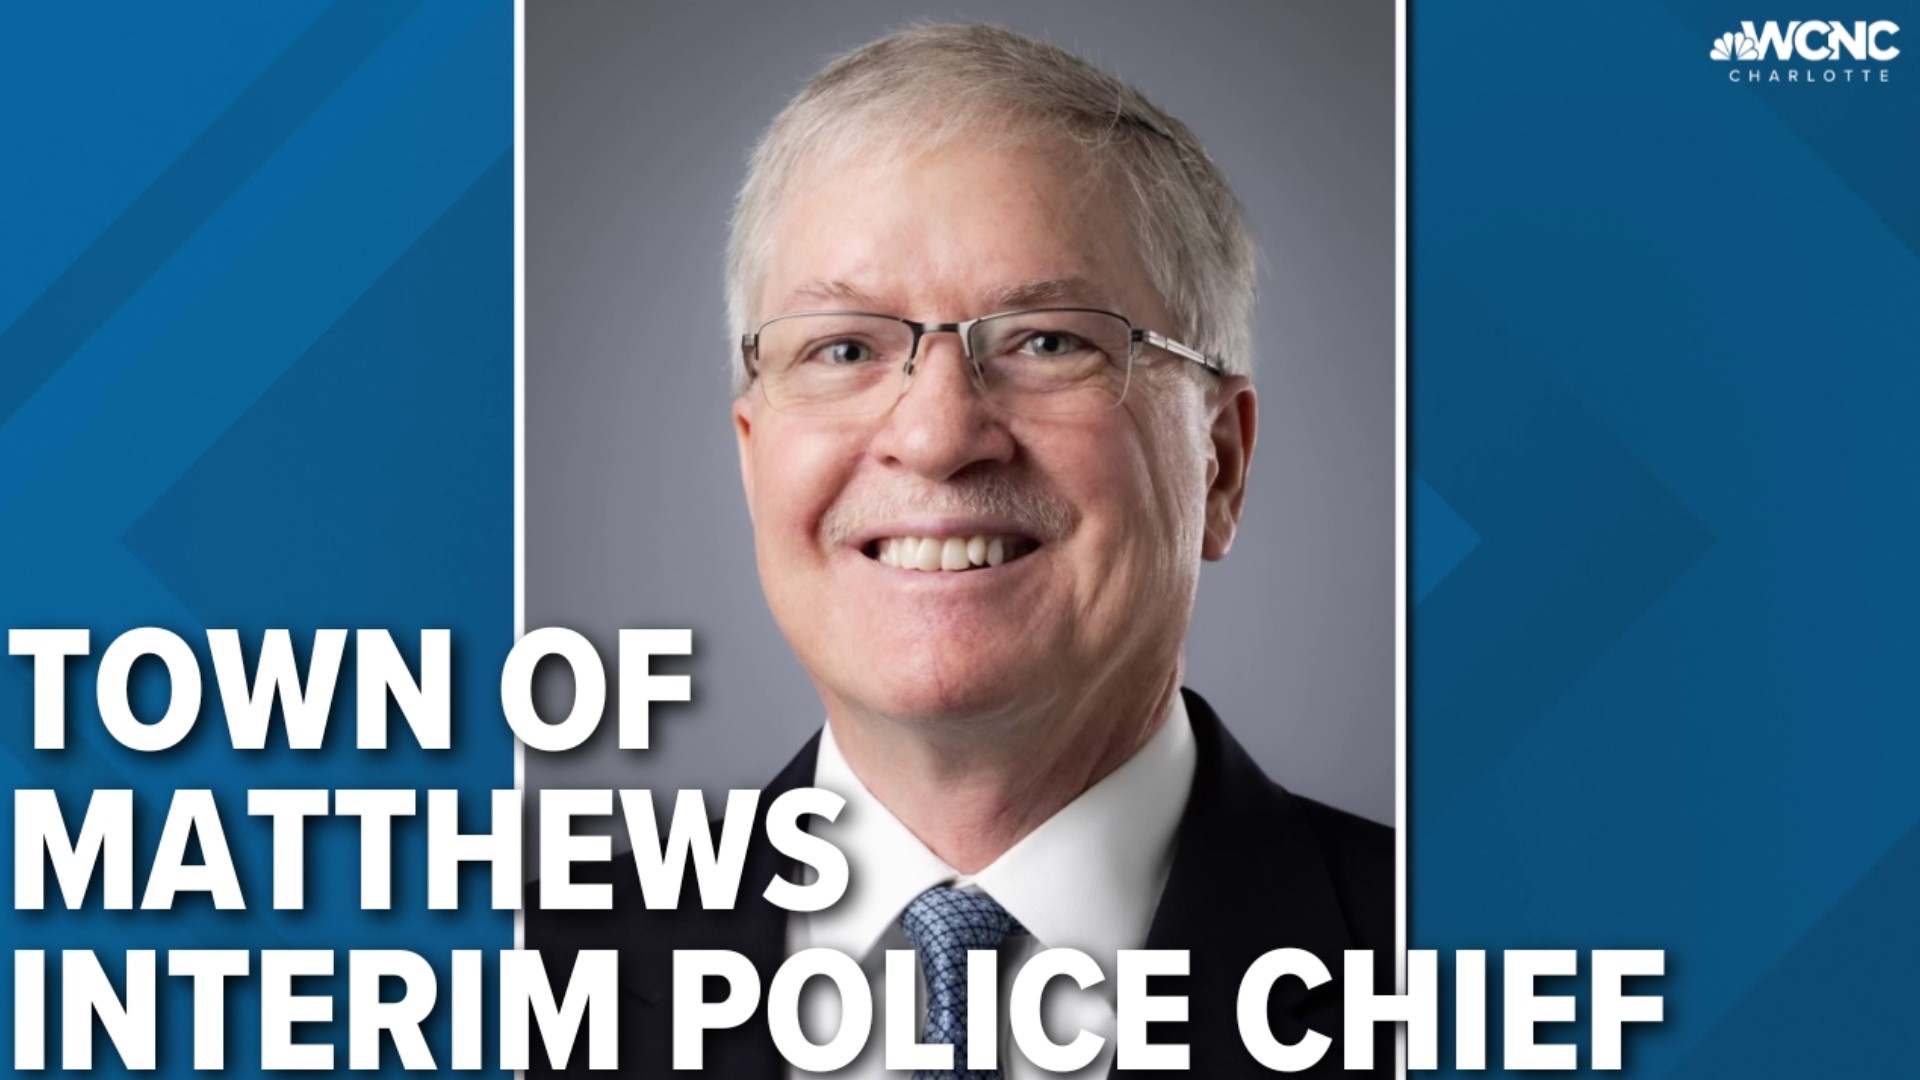 As the town of Matthews looks to start searching for a permanent police chief, an interim leader for the Matthews Police Department has been named.